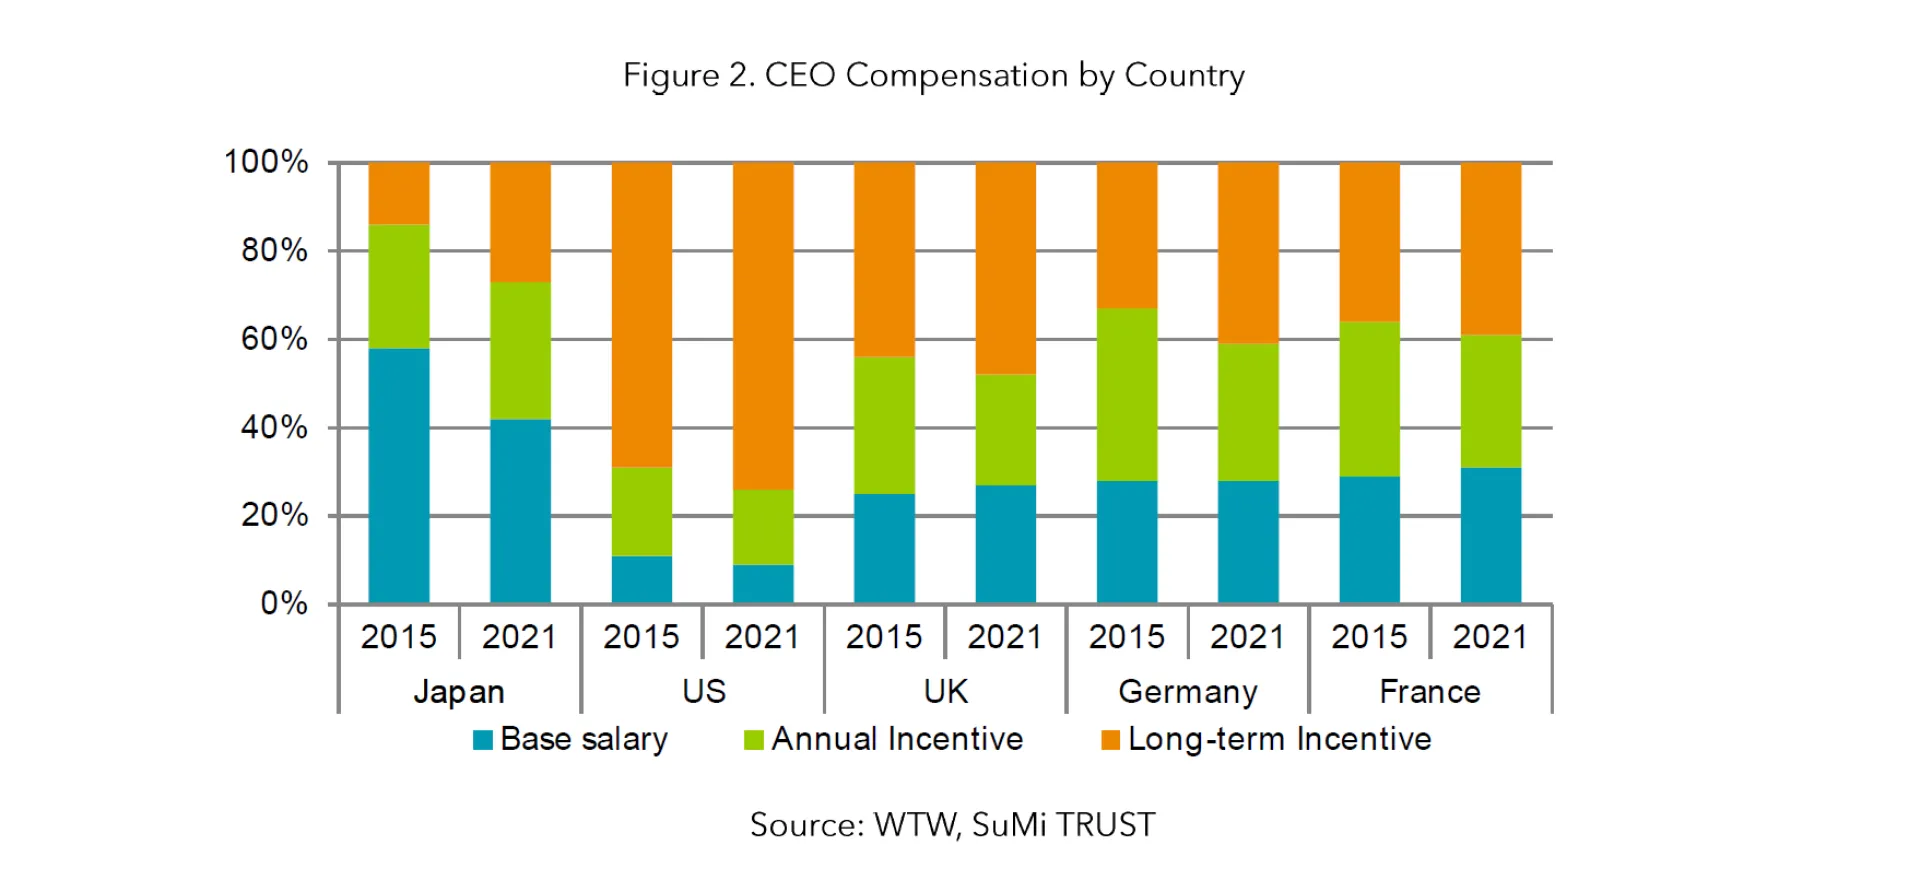 Figure 2. CEO Compensation by Country